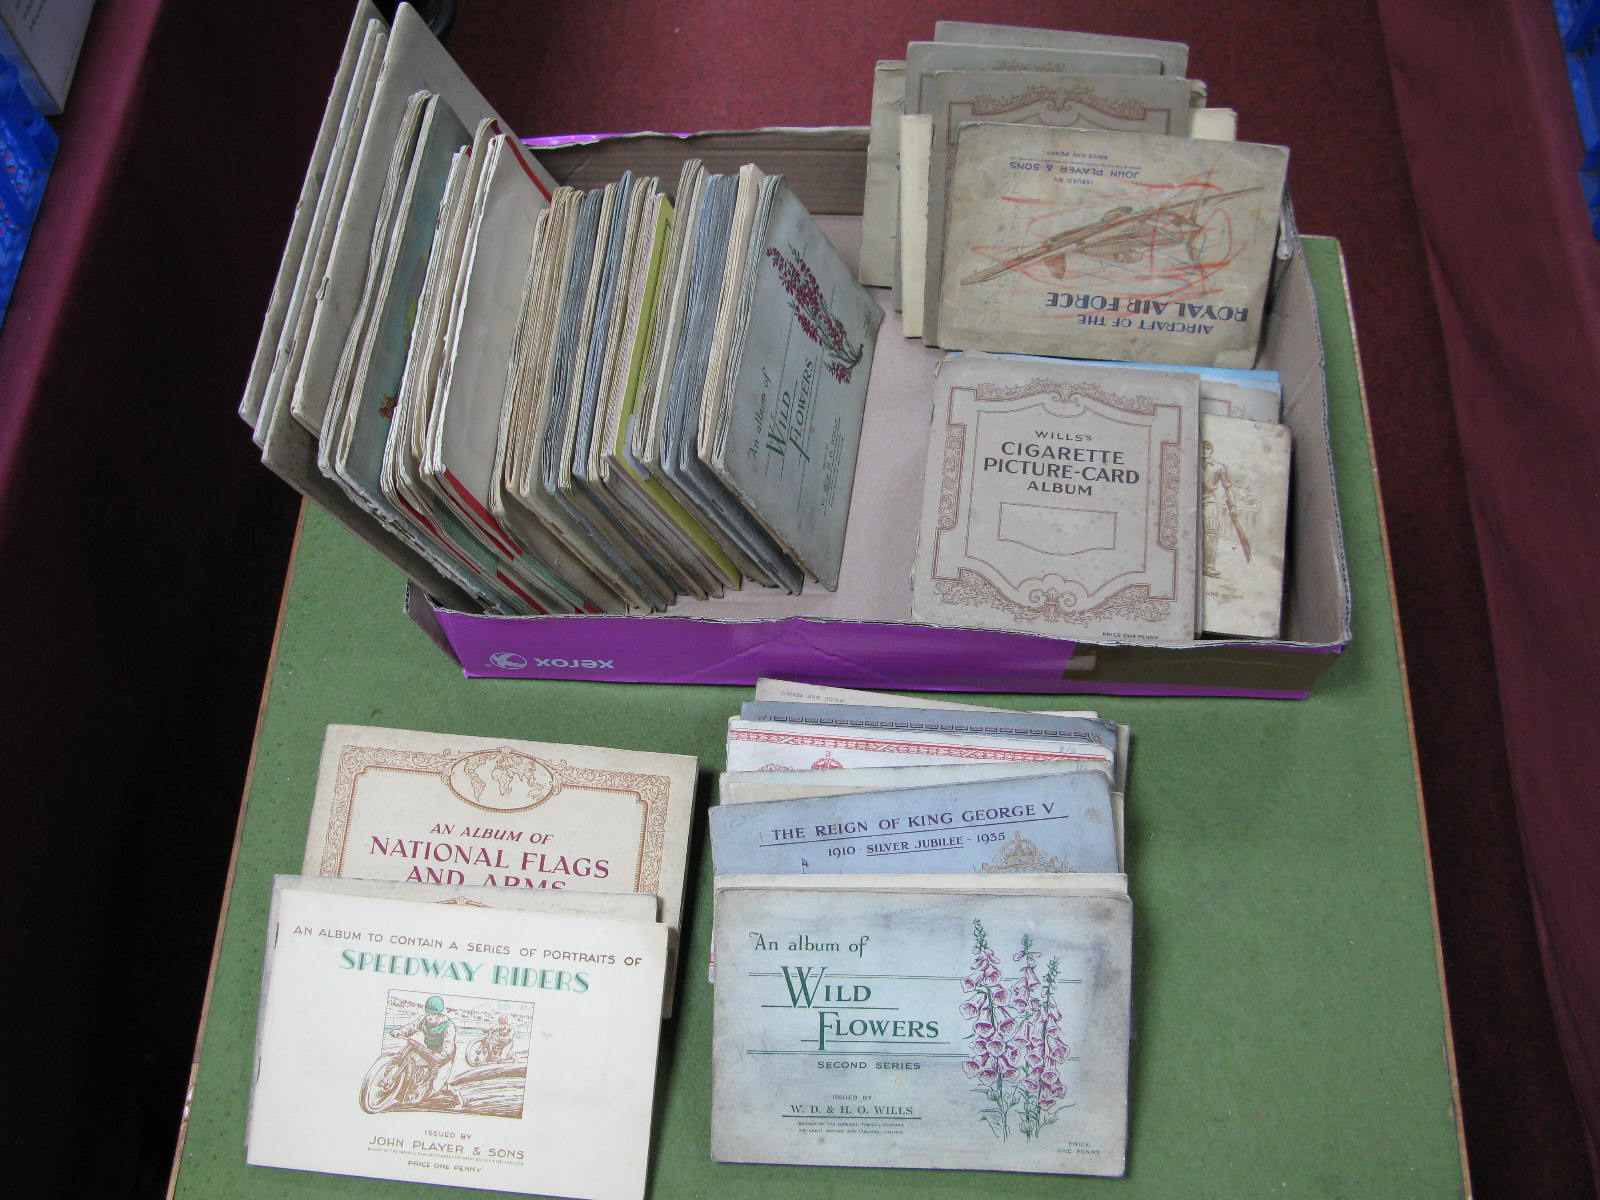 Over Fifty Pre-War Cigarette Card Albums by John Player, Wills, Park Drive, Among Others. Mainly